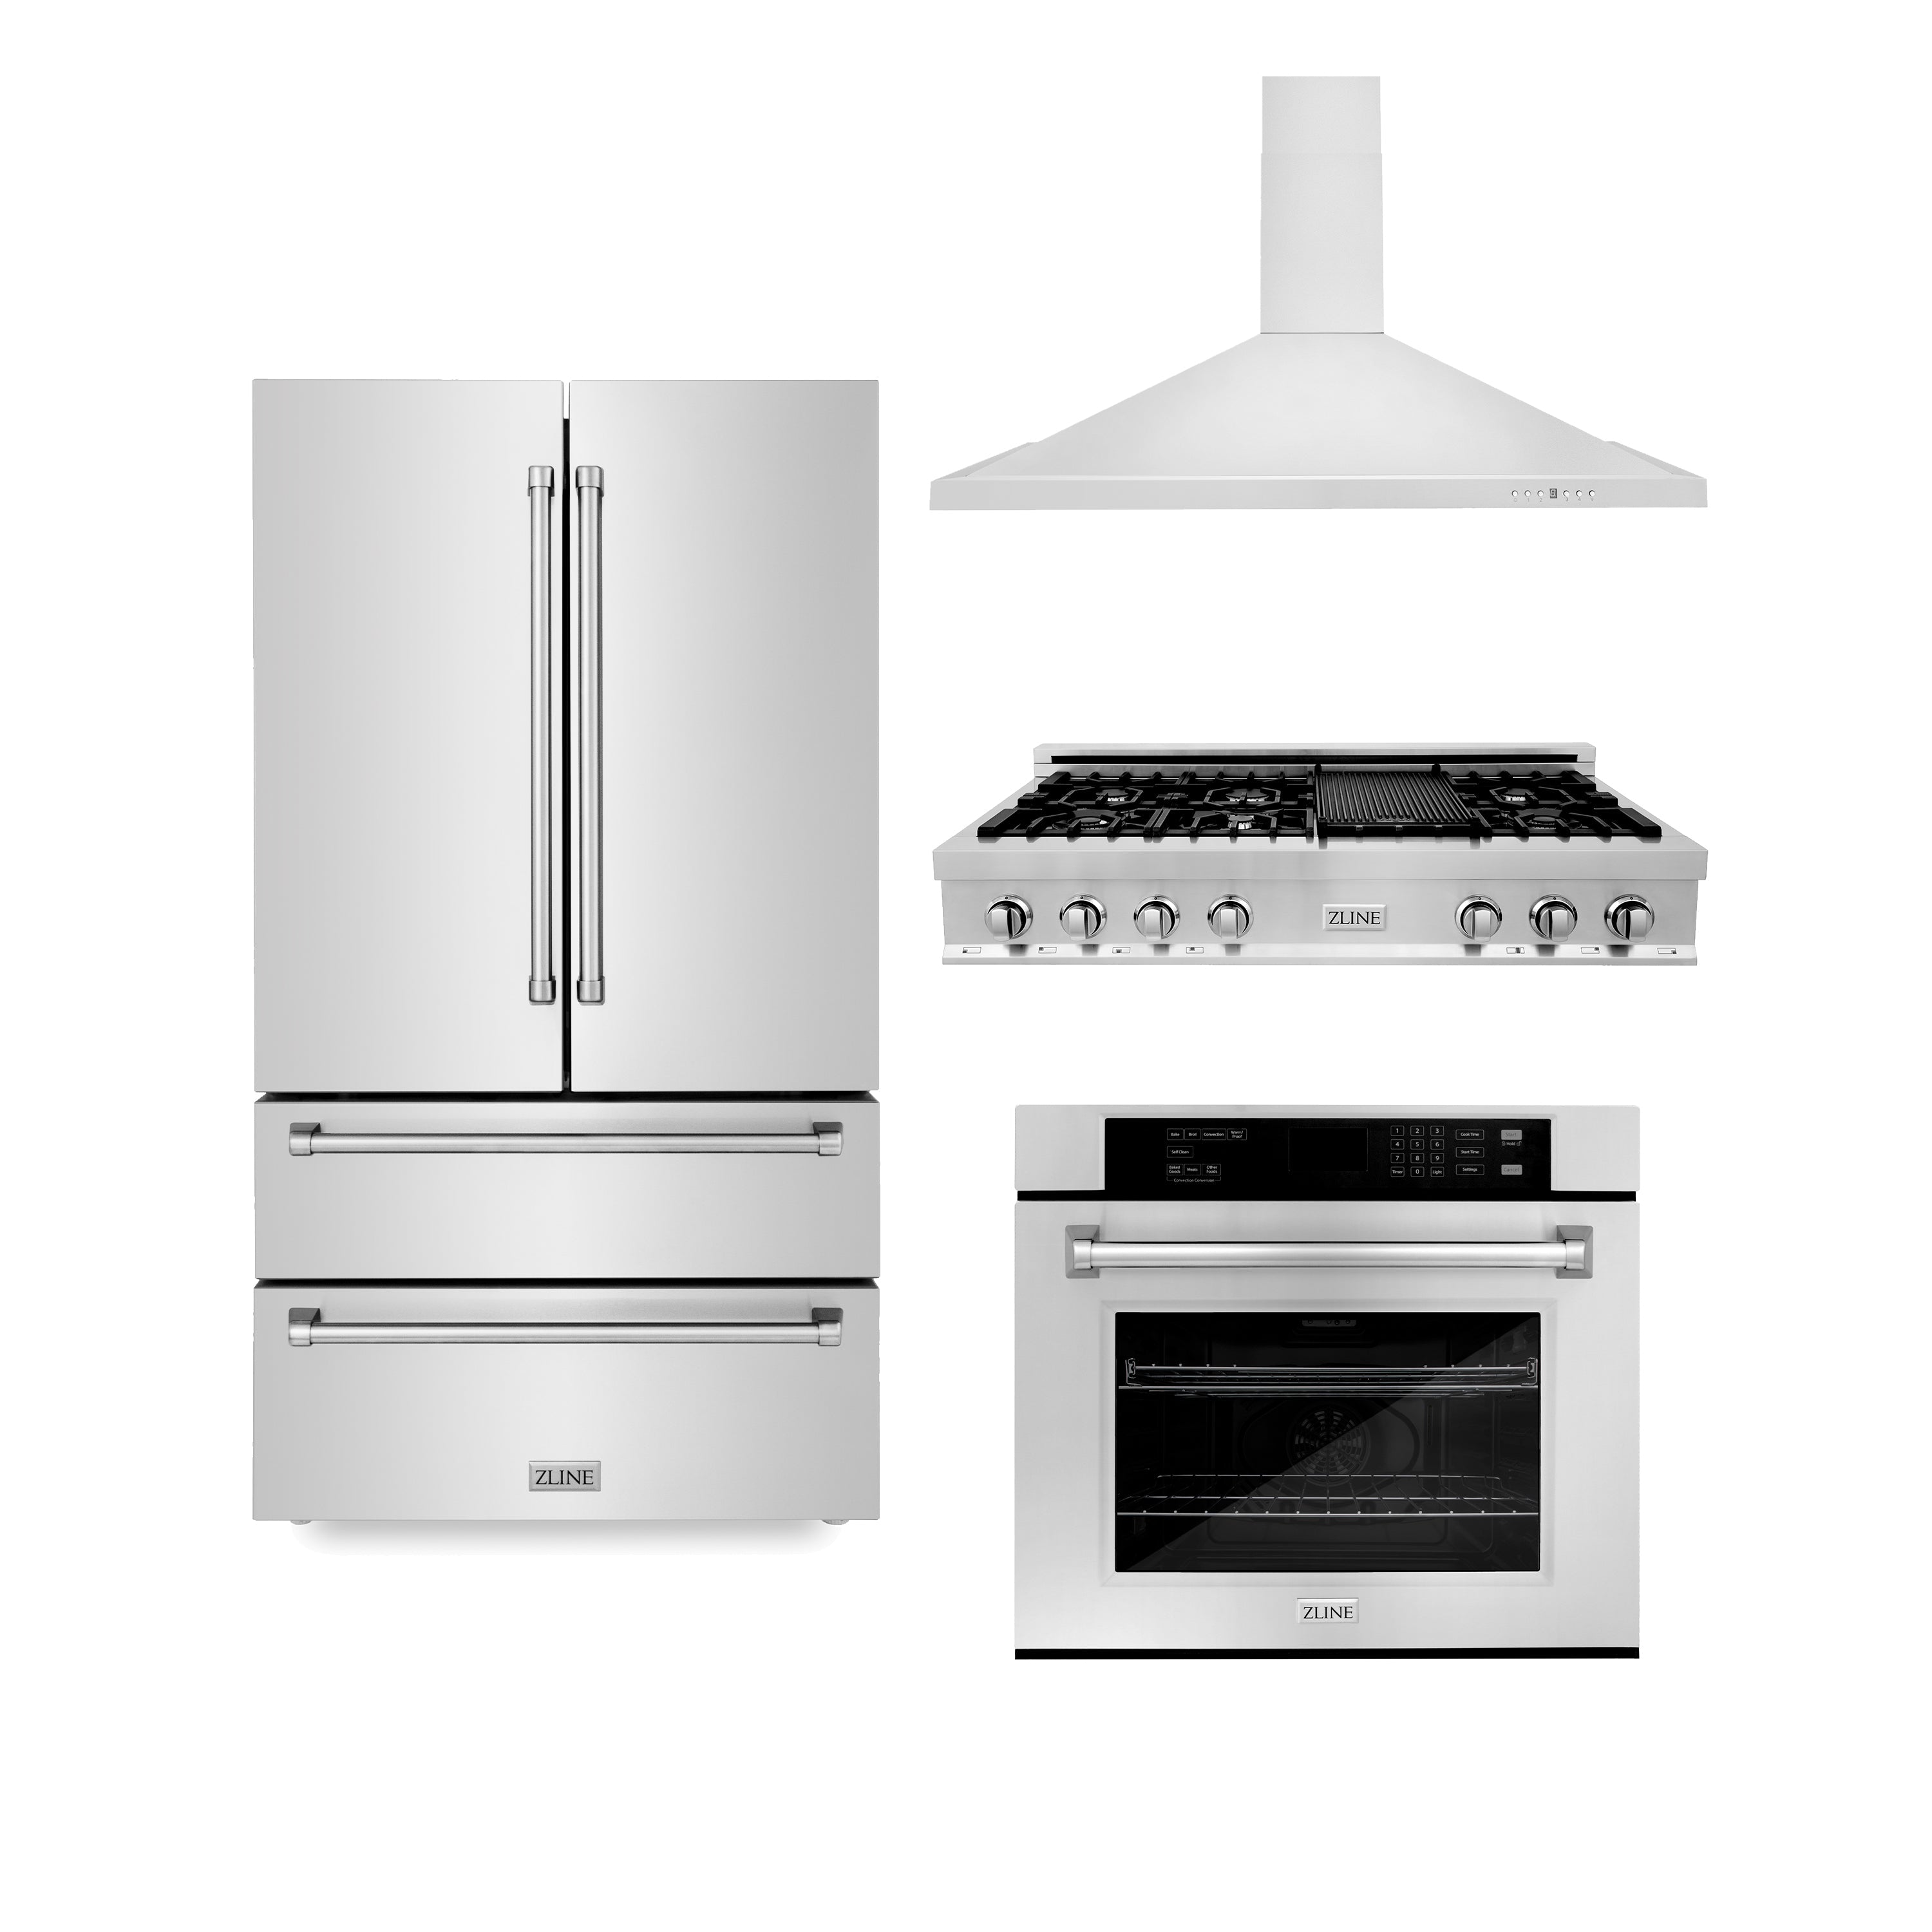 48" ZLINE Appliances Package with Refrigeration, 48" Stainless Steel Rangetop, 48" Range Hood and 30" Single Wall Oven (4KPR-RTRH48-AWS)